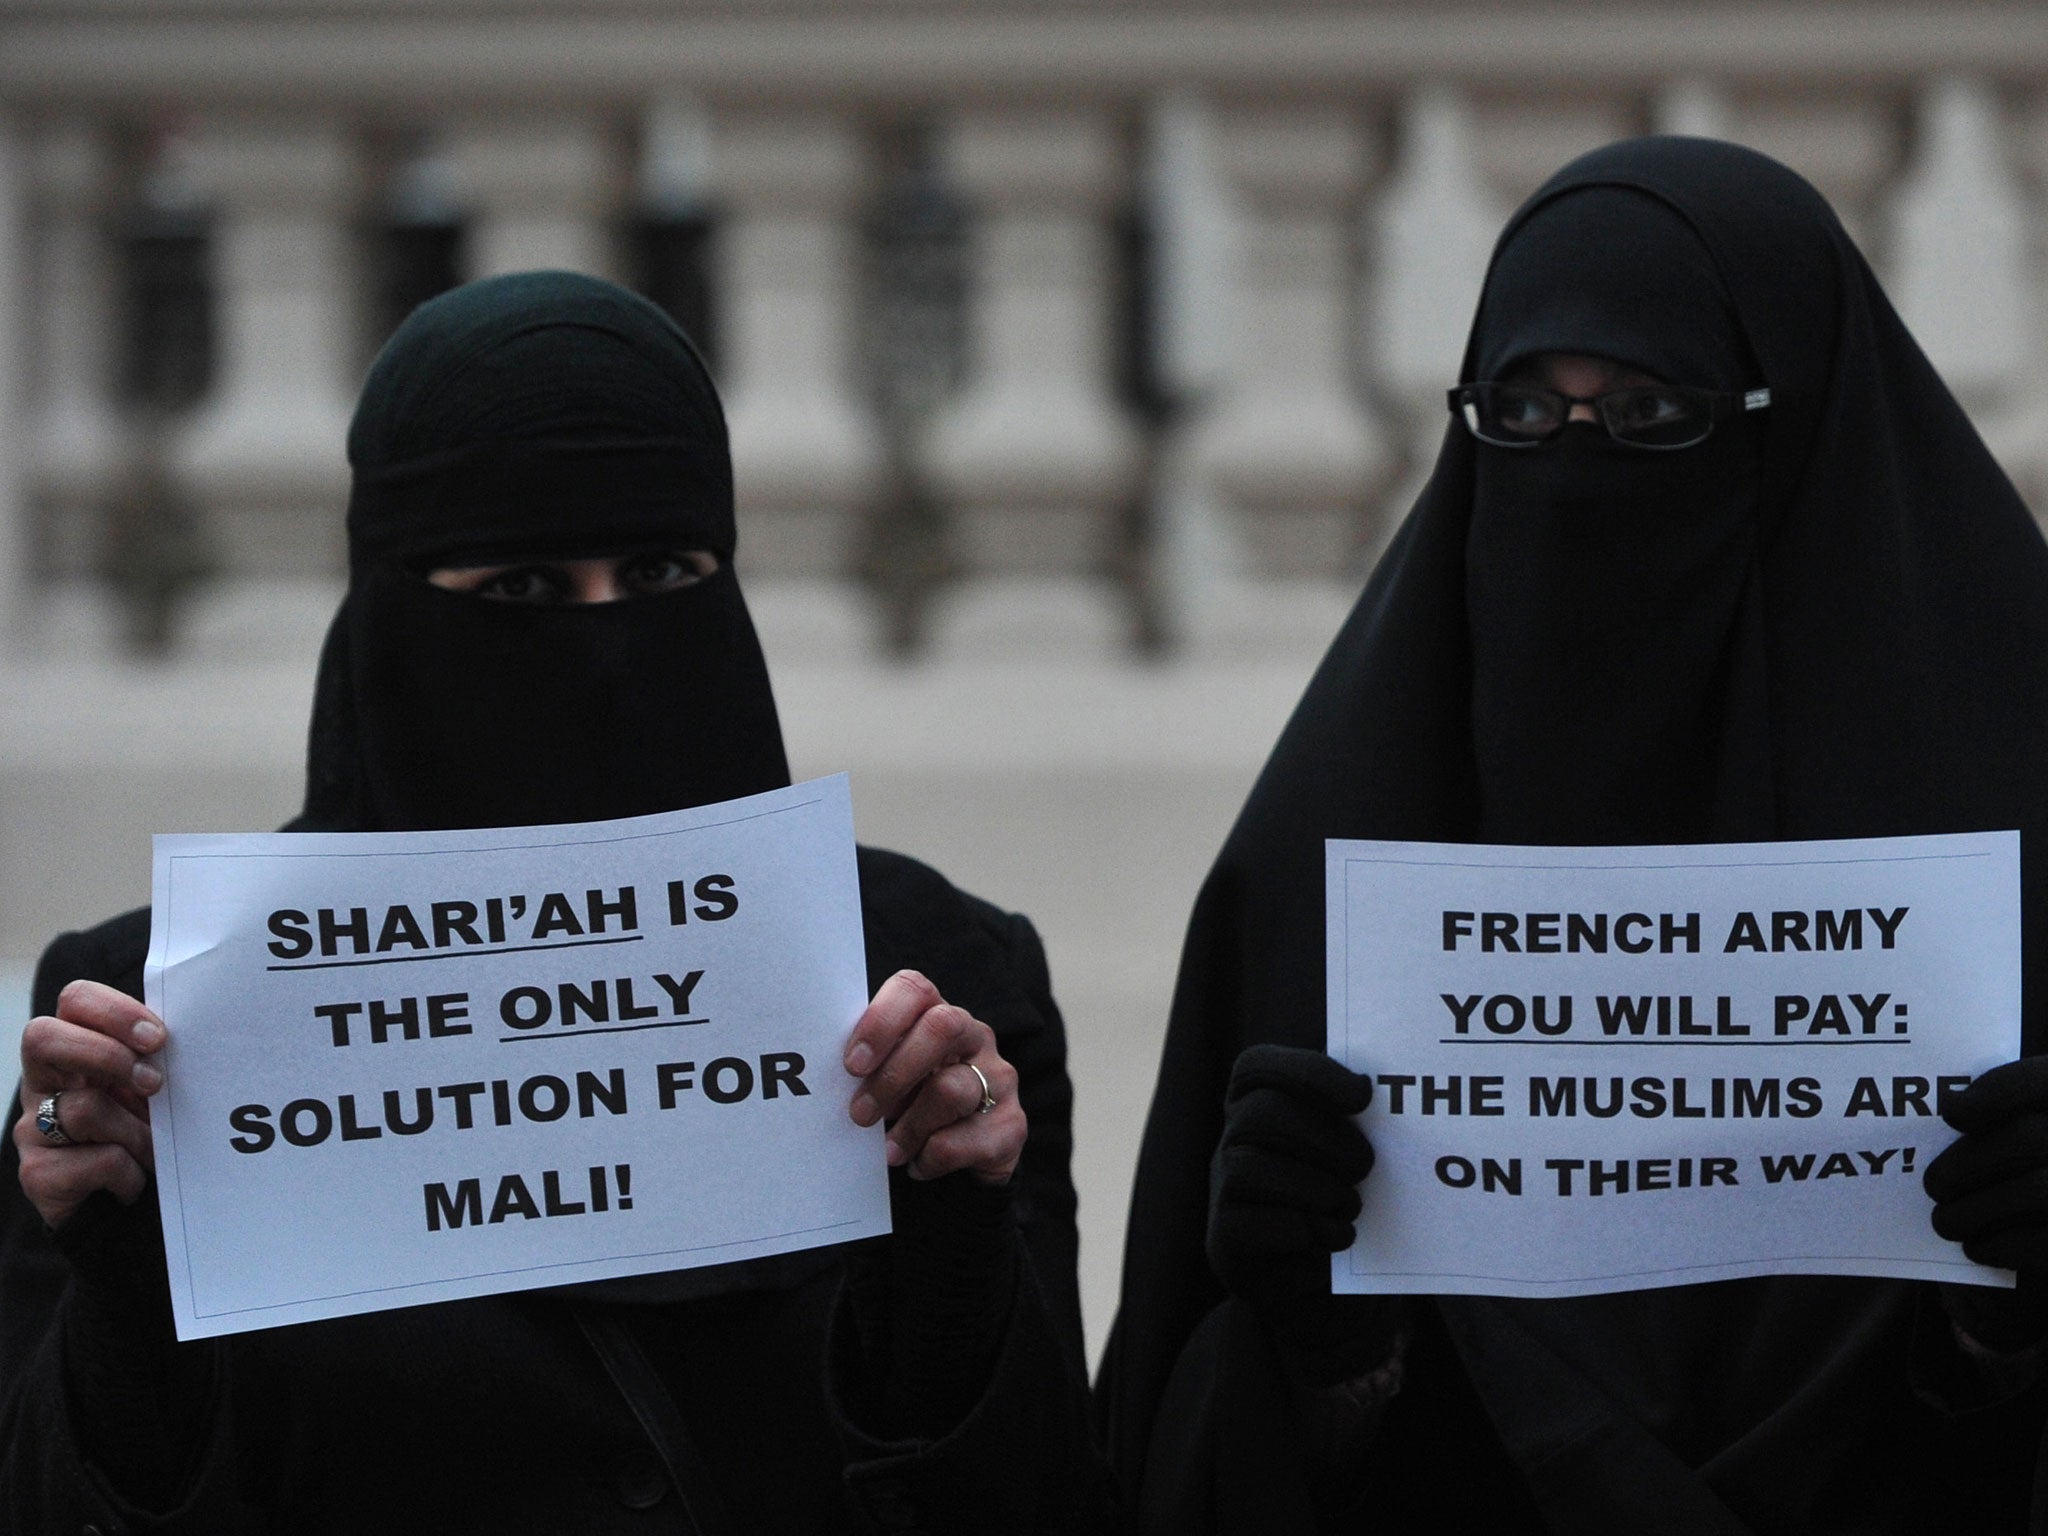 Veiled Muslim women hold up signs as they join a protest in response to French military action in Mali outside the French embassy in central London on January 12, 2013.